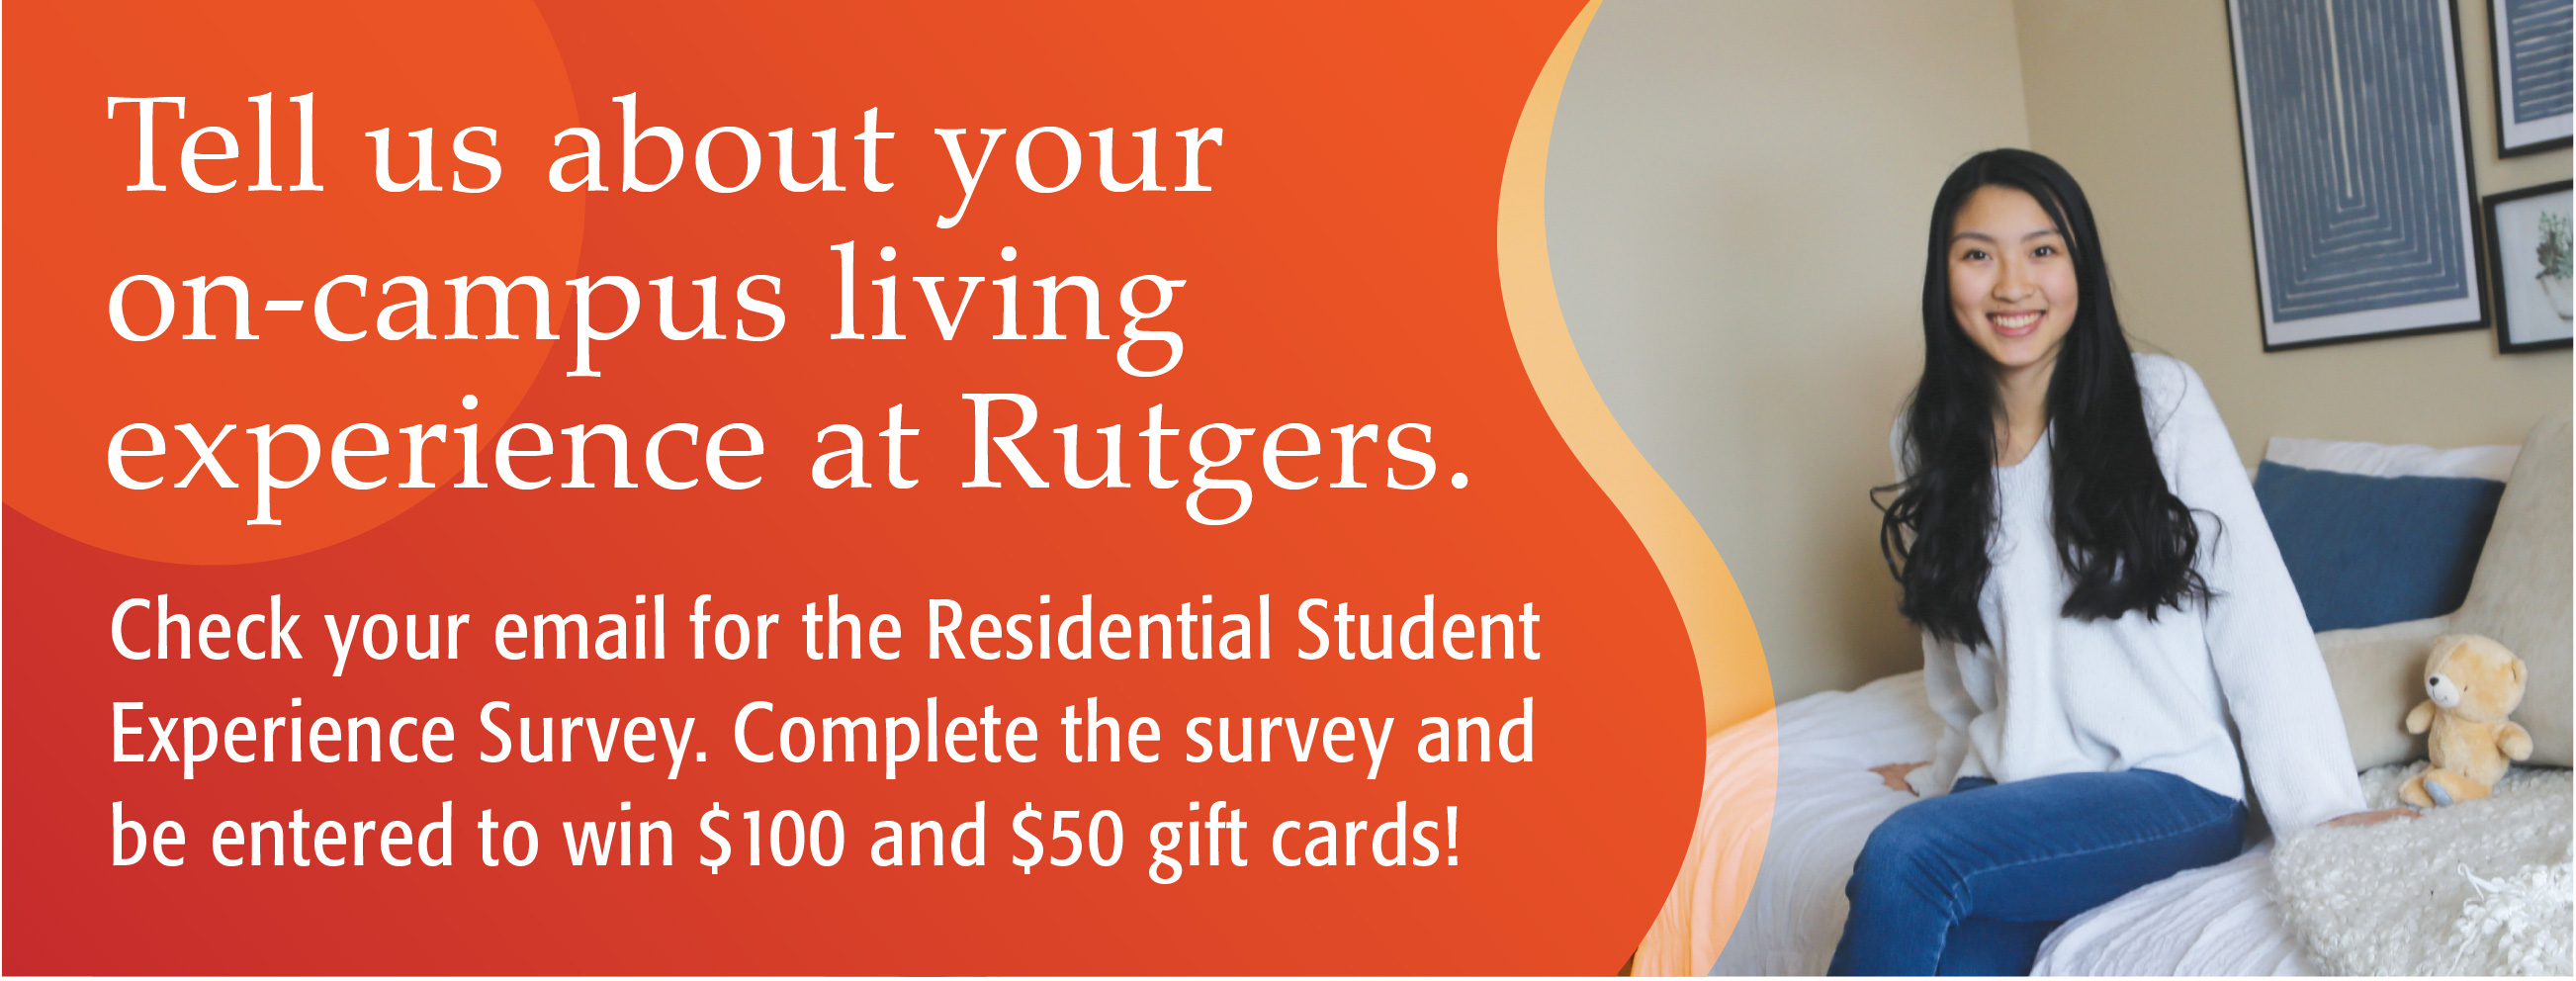 Tell us about your on-campus living experience at Rutgers. Check your email for the Residential Experience Survey. Complete the survey and be entered to win $100 and $50 gift cards!